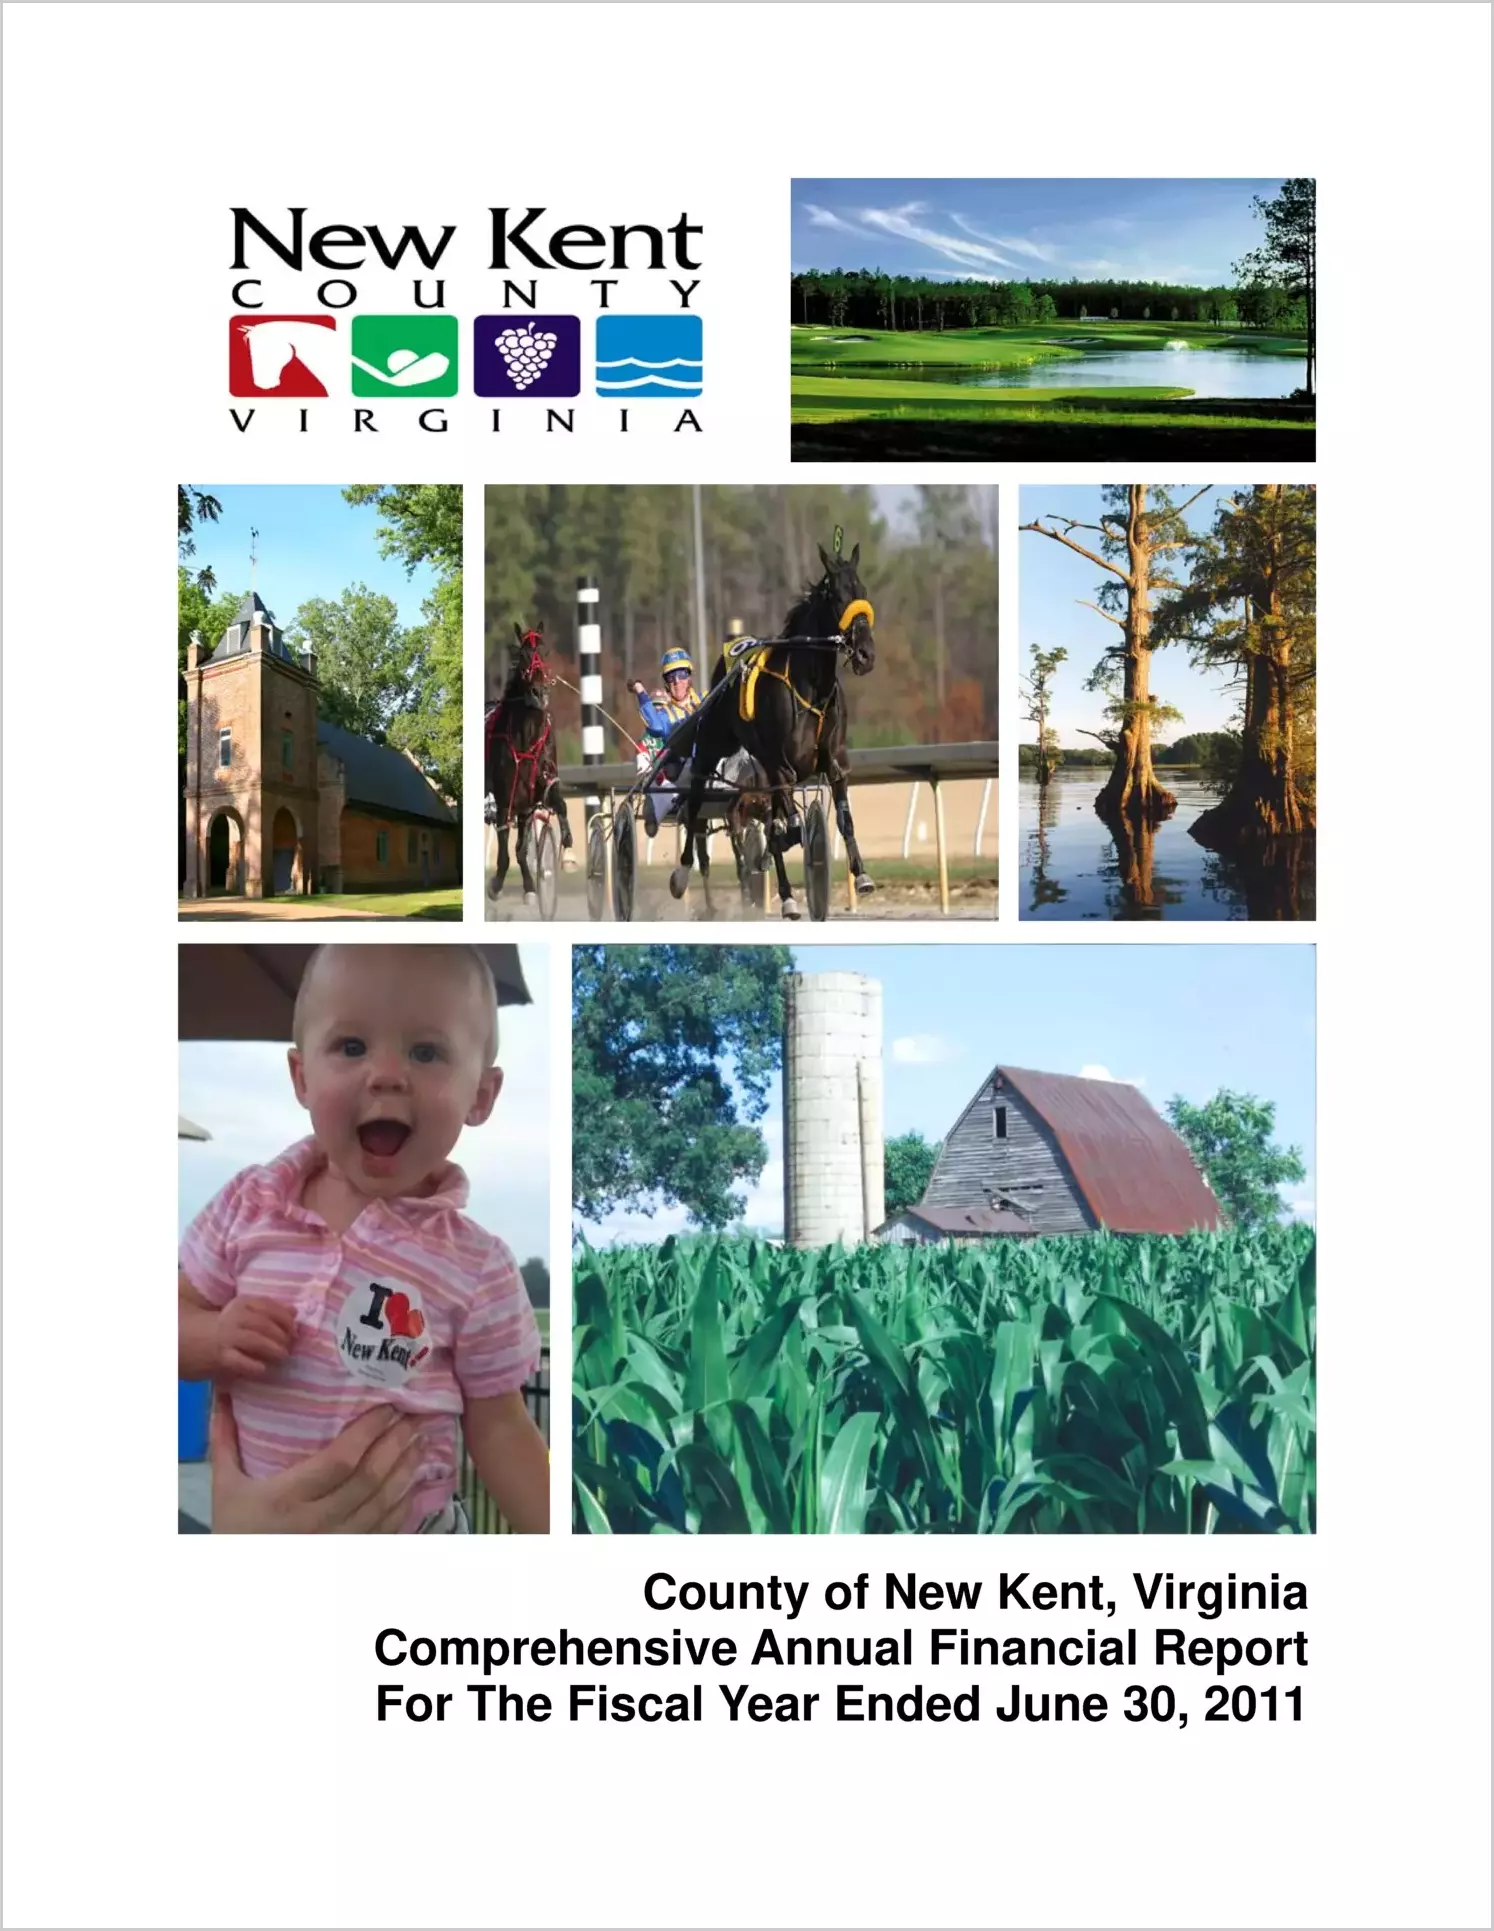 2011 Annual Financial Report for County of New Kent